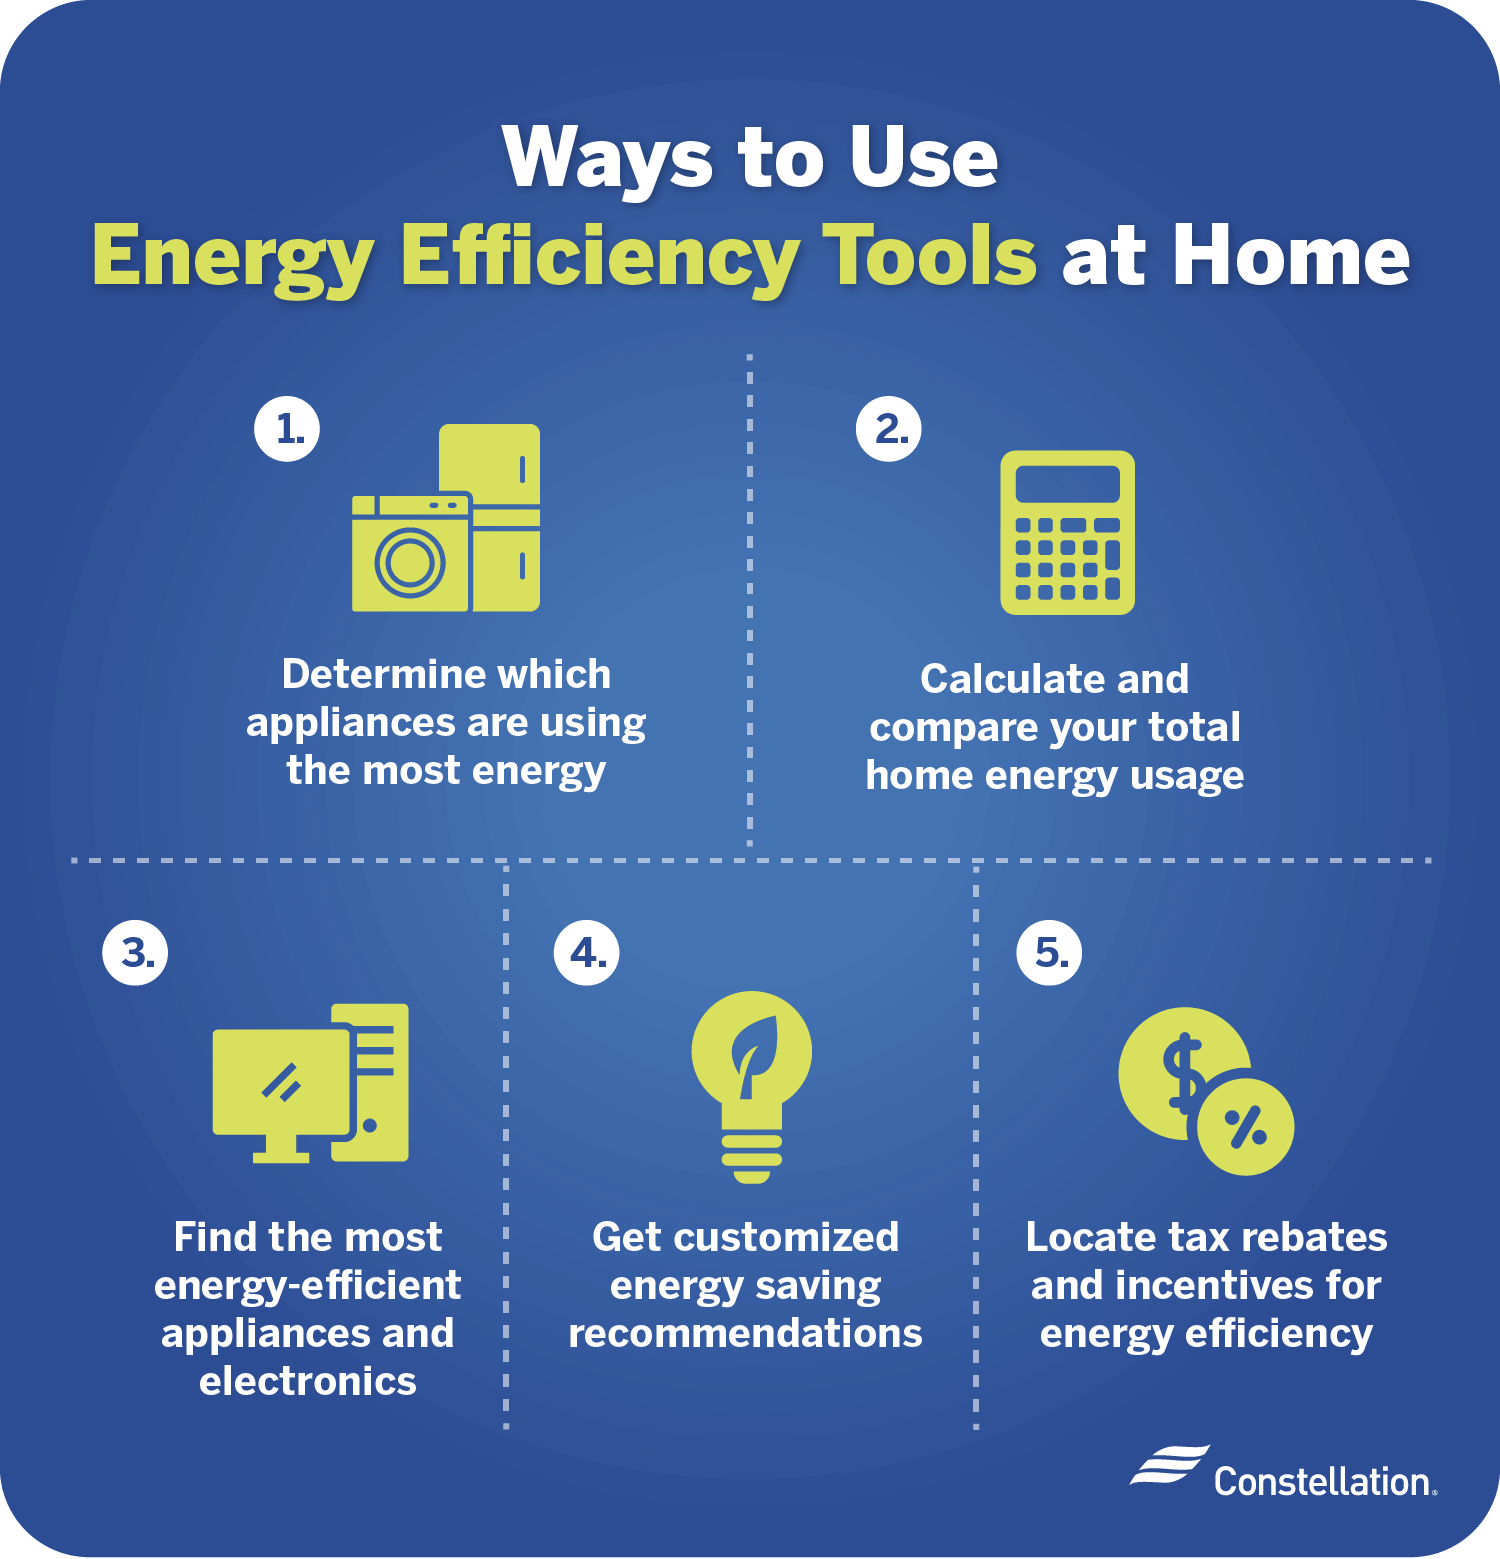 Energy efficiency tools to help you save energy at home.